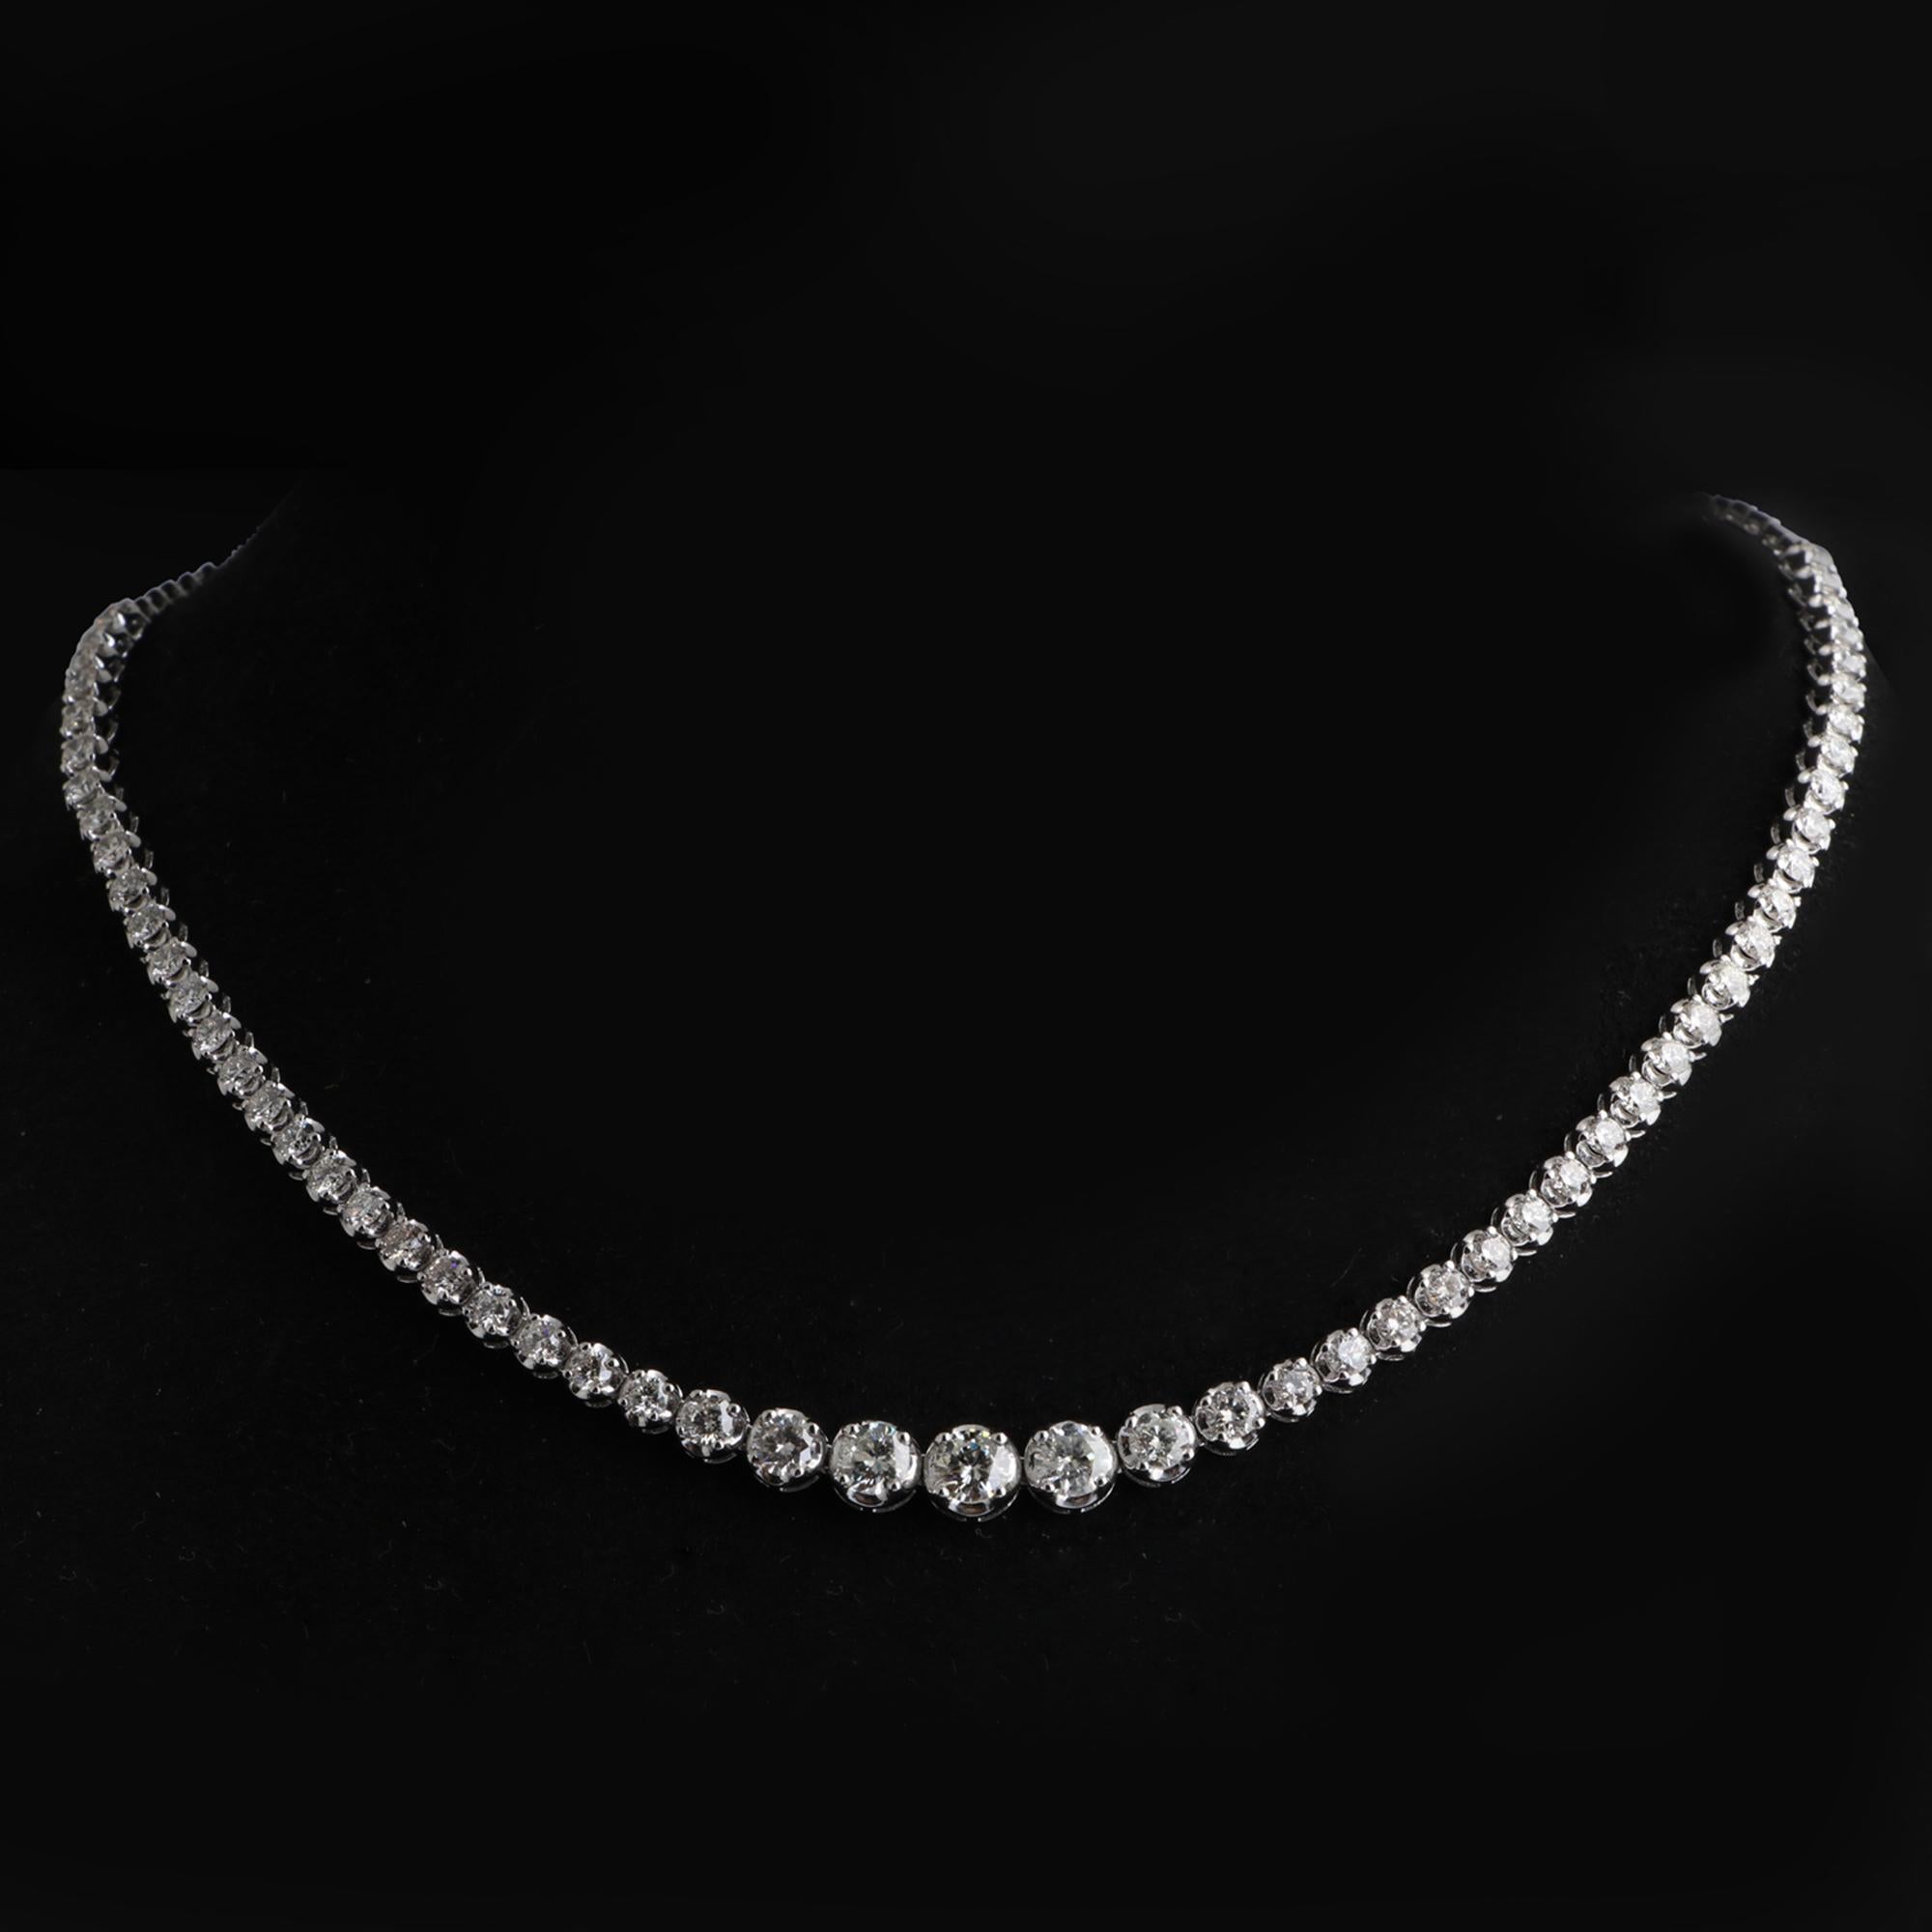 Modern 6.1 Carat SI Clarity HI Color Diamond Chain Necklace 14 Karat White Gold Jewelry For Sale